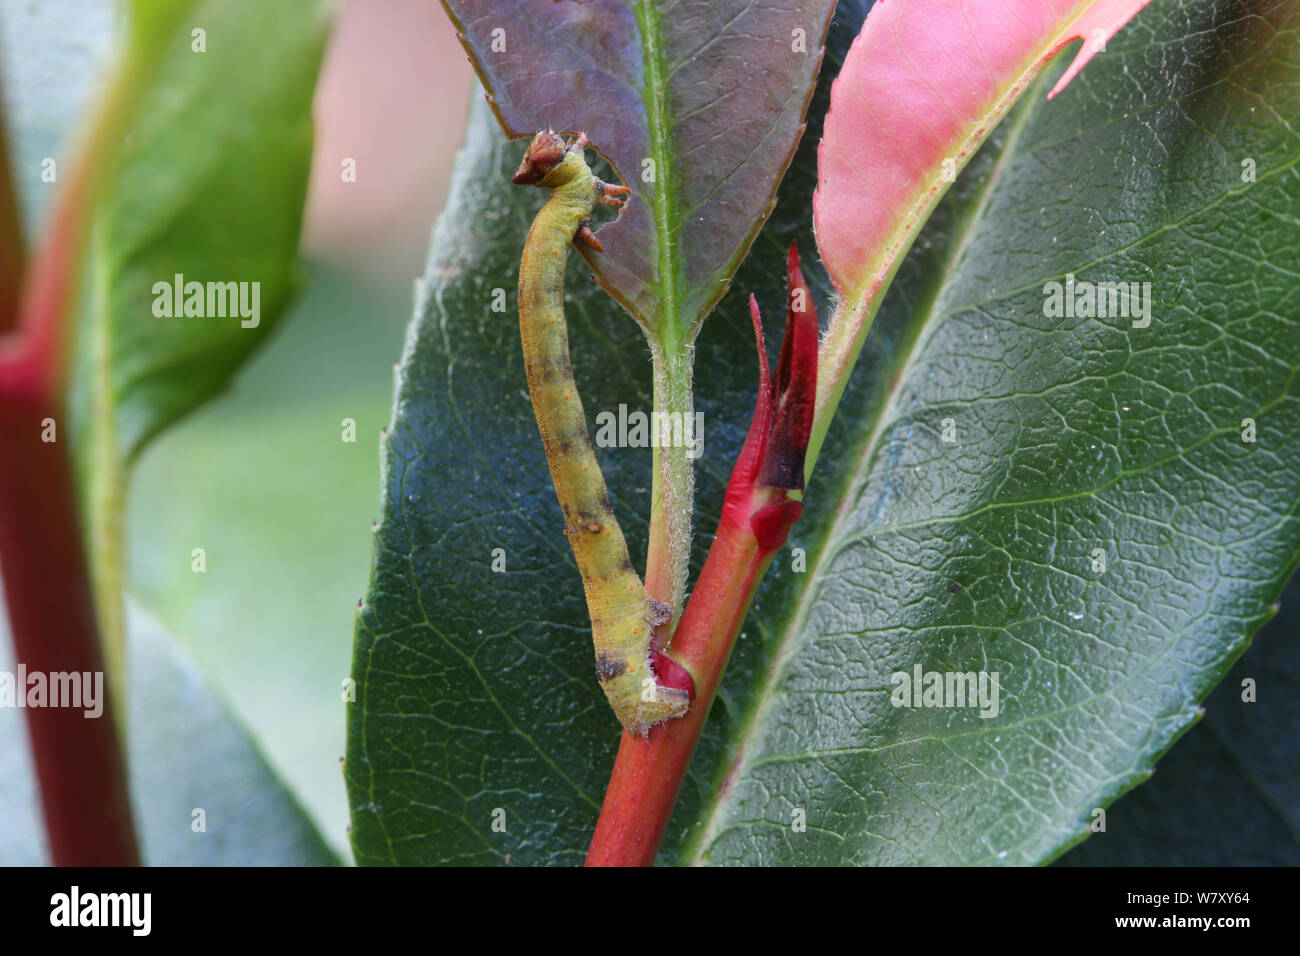 Swallowtail moth (Ourapteryx sambucaria) caterpillar feeding on leaf (Photinia sp) showing camouflage colour and form to match leaf petioles. Surrey, England, October. Stock Photo